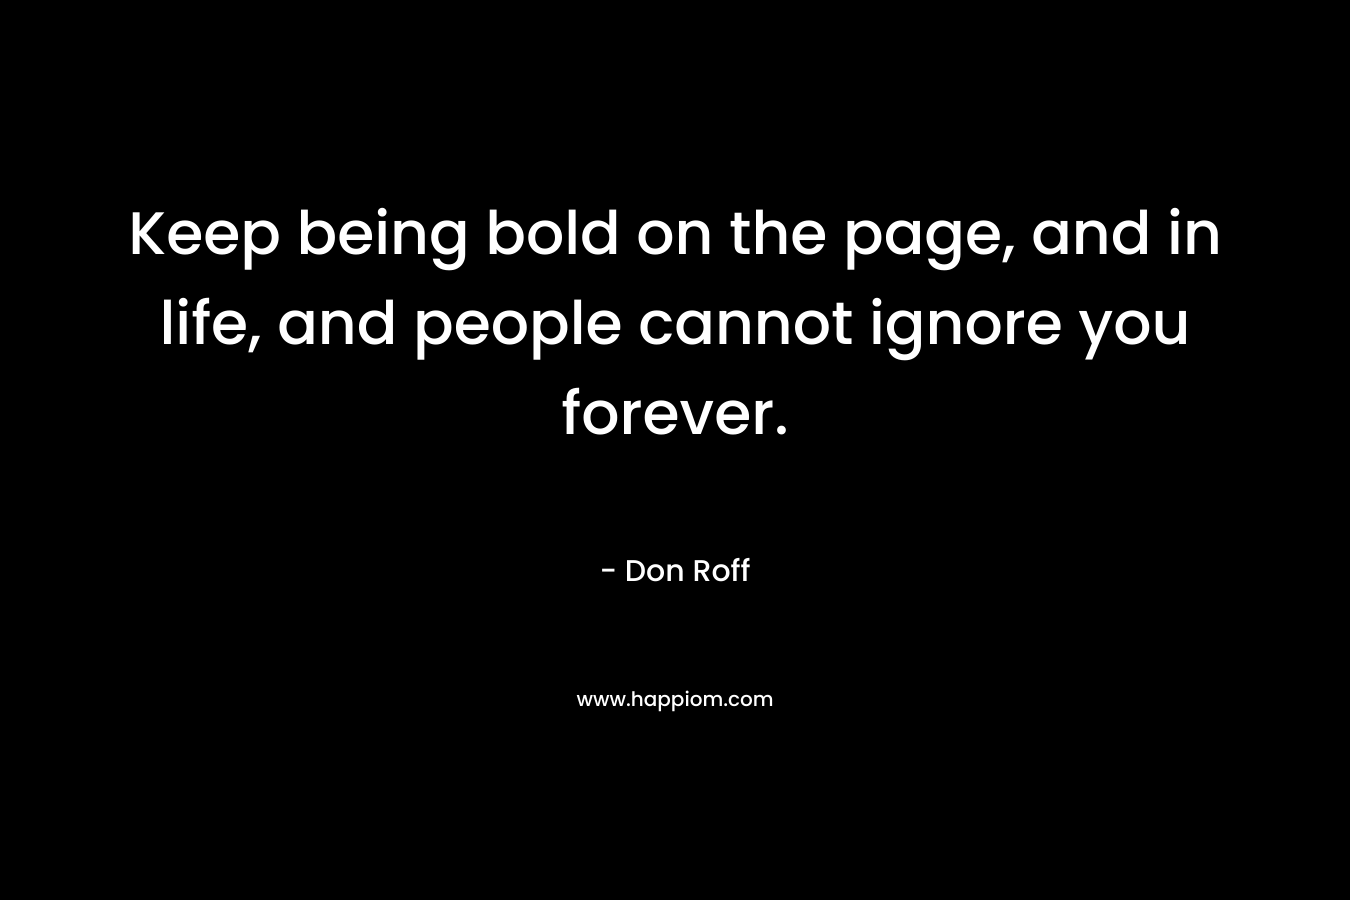 Keep being bold on the page, and in life, and people cannot ignore you forever.